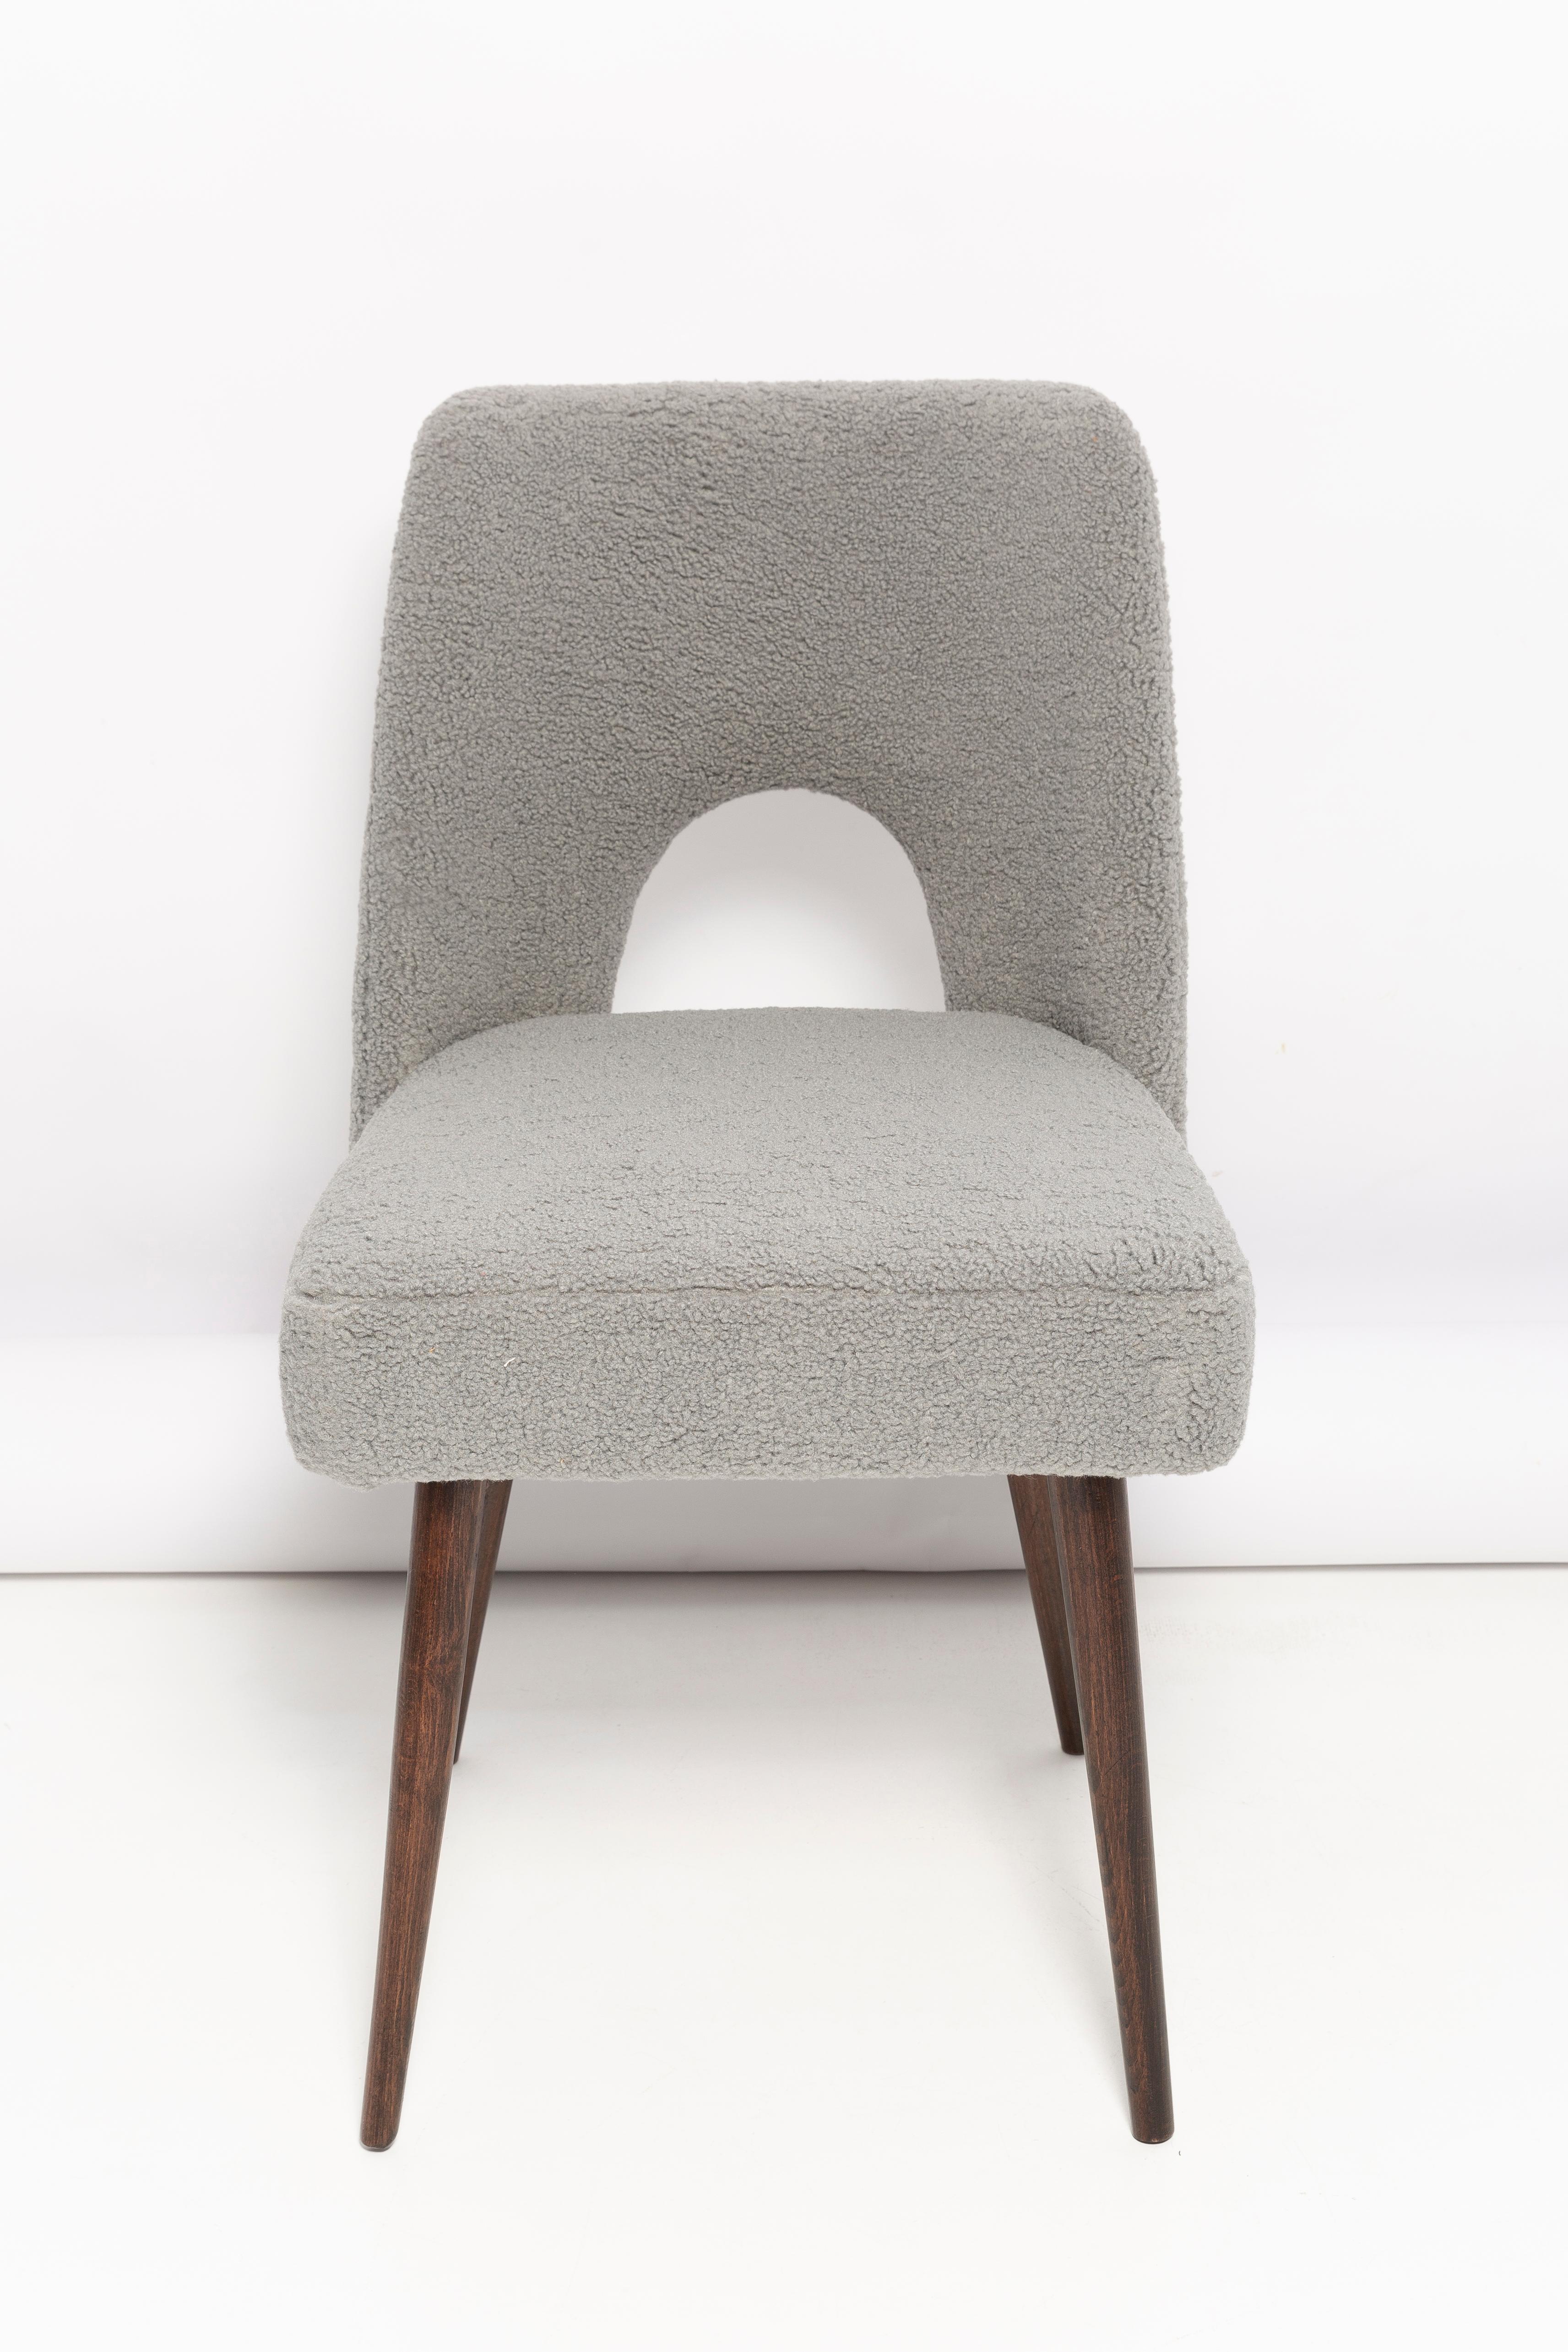 Gray Boucle 'Shell' Chair, Dark Brown Beech Wood, Poland, 1960s For Sale 2